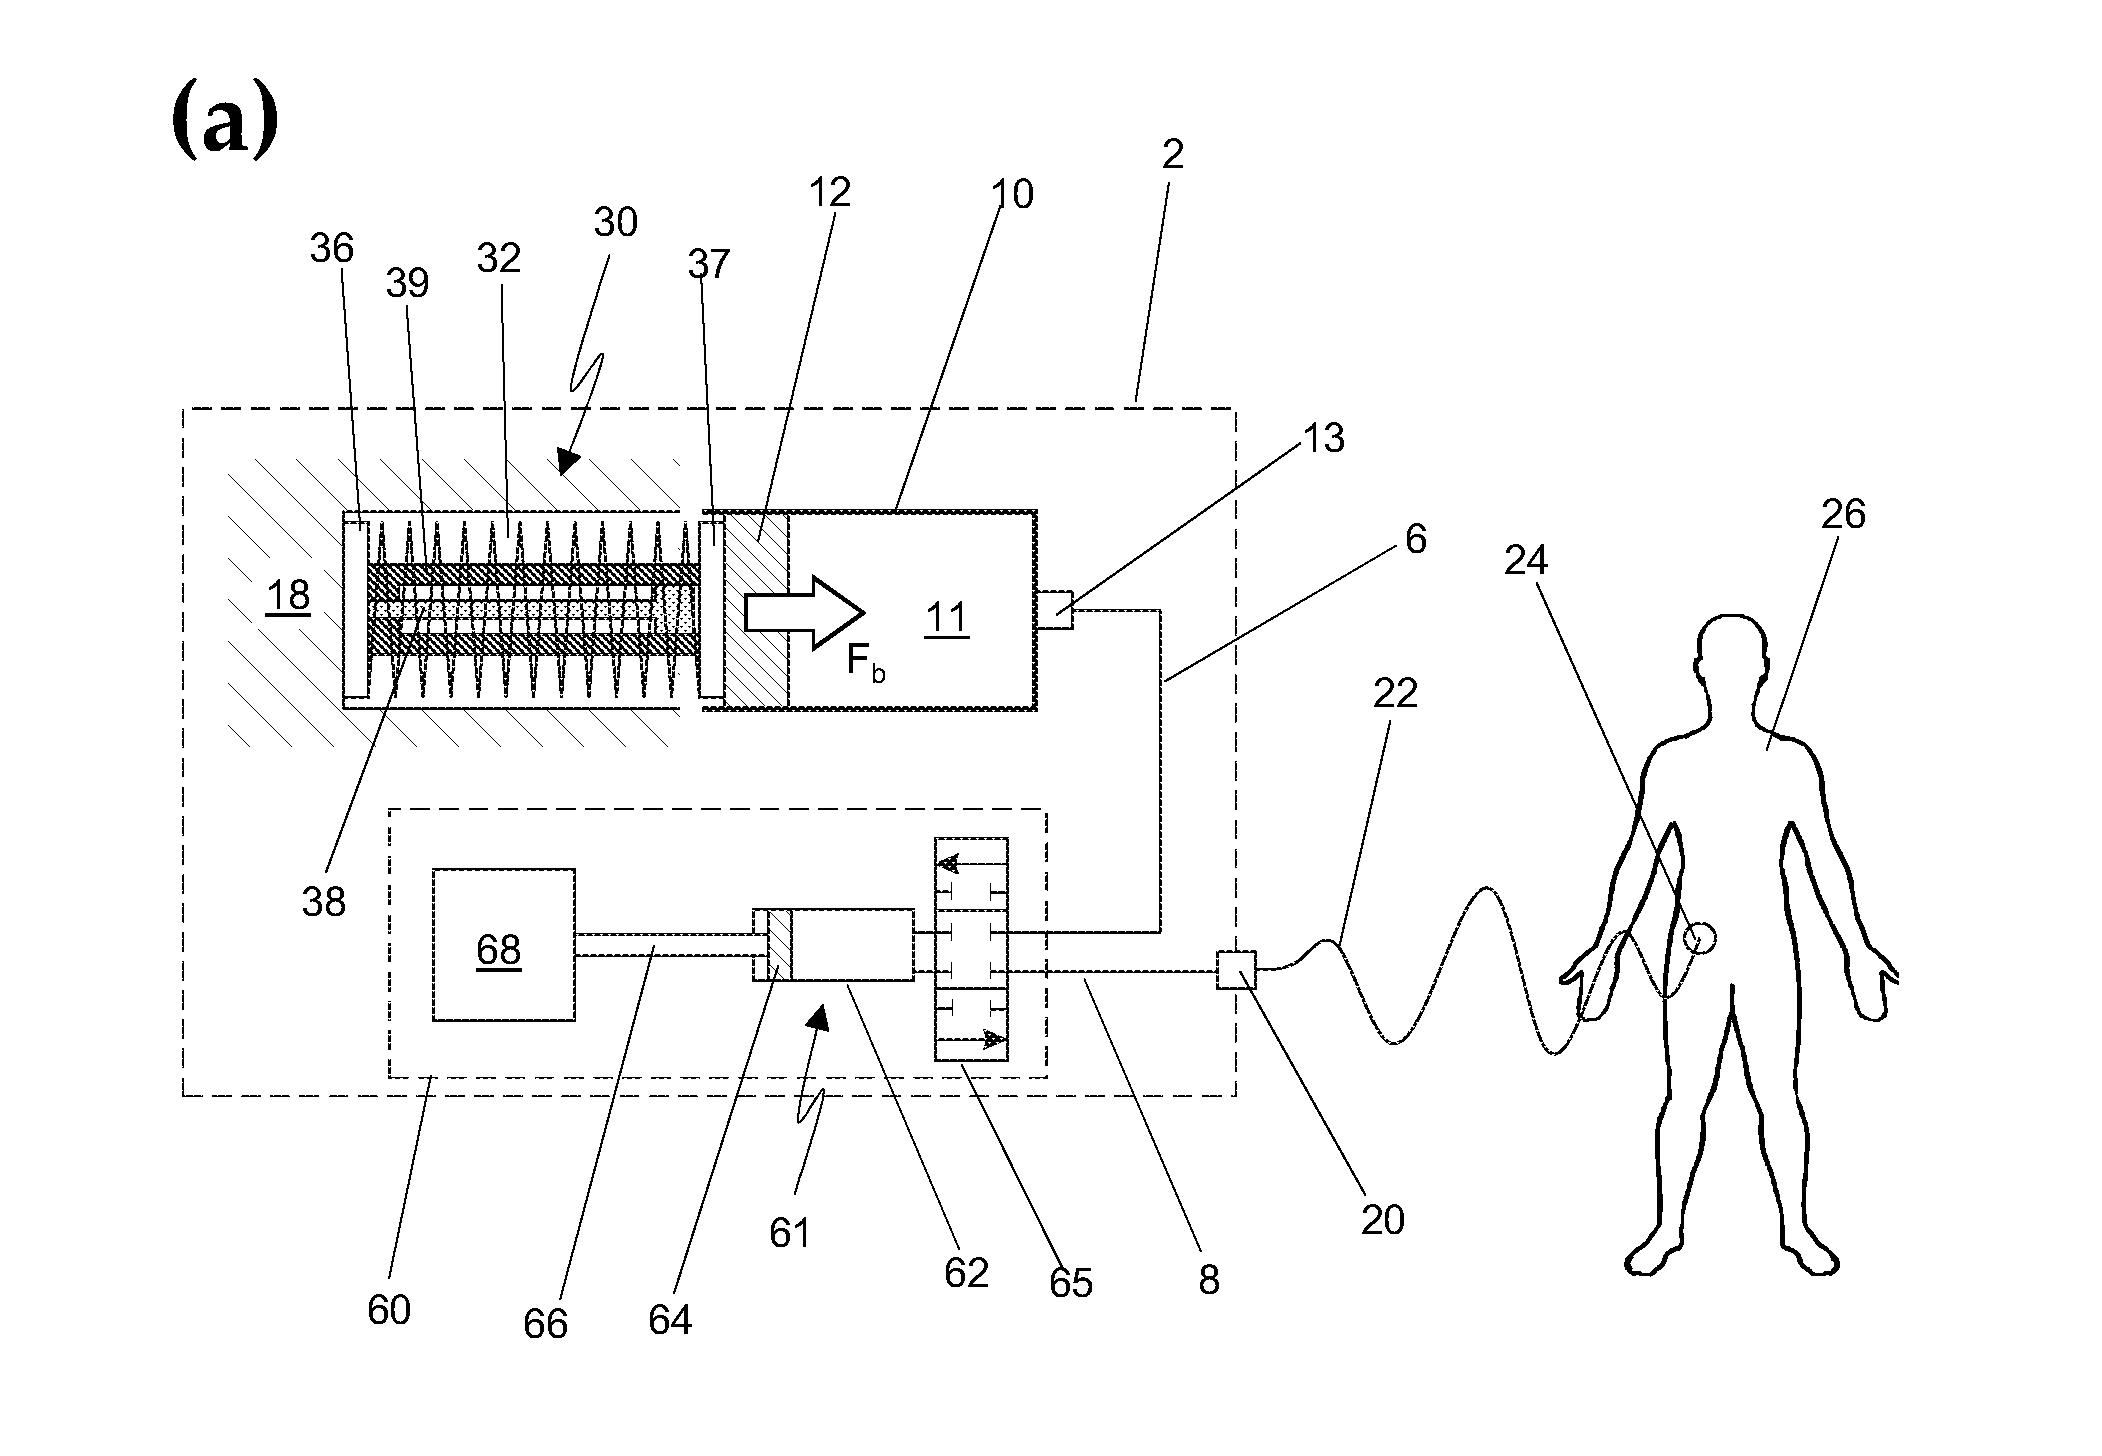 Spring force assembly for biasing or actuating stoppers of syringes, injection pen cartridges and the like